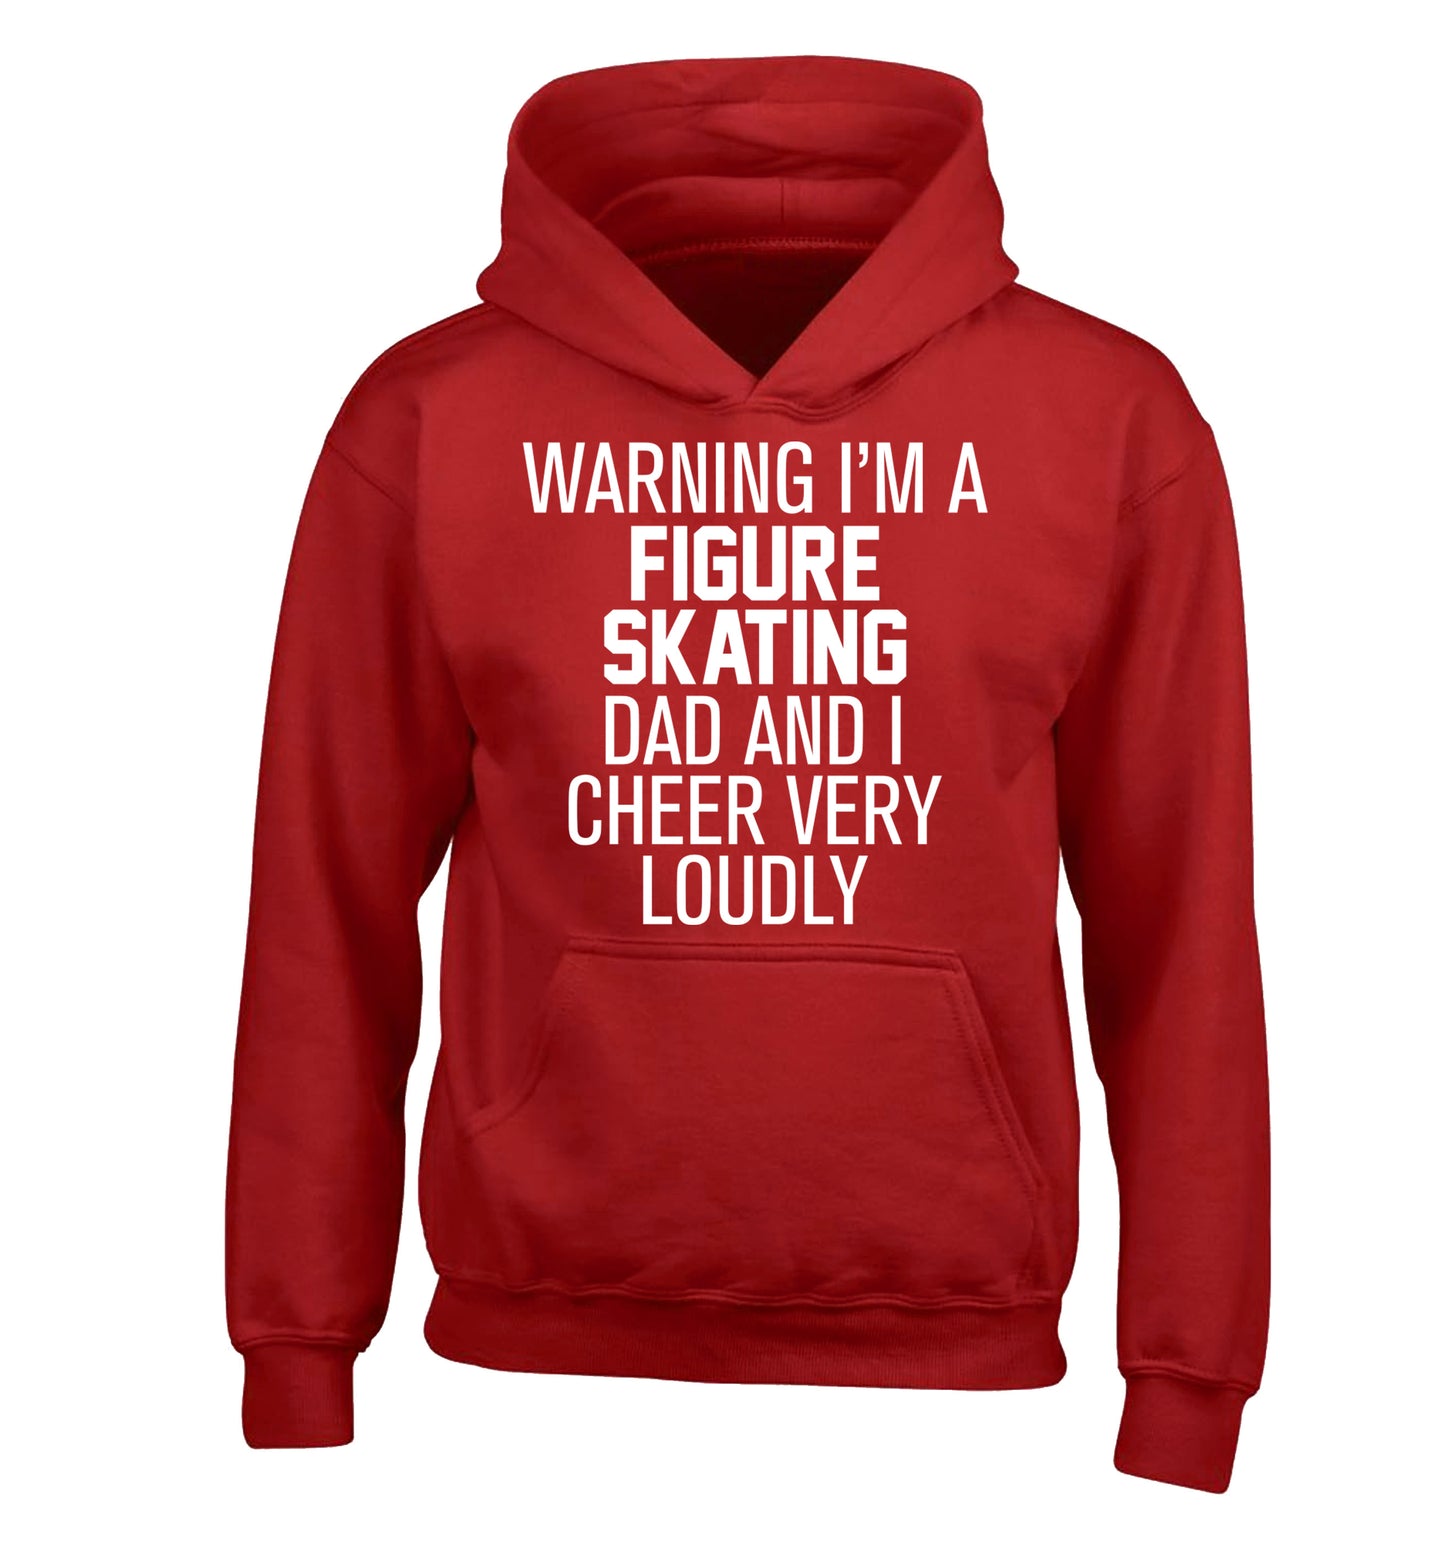 Warning I'm a figure skating dad and I cheer very loudly children's red hoodie 12-14 Years